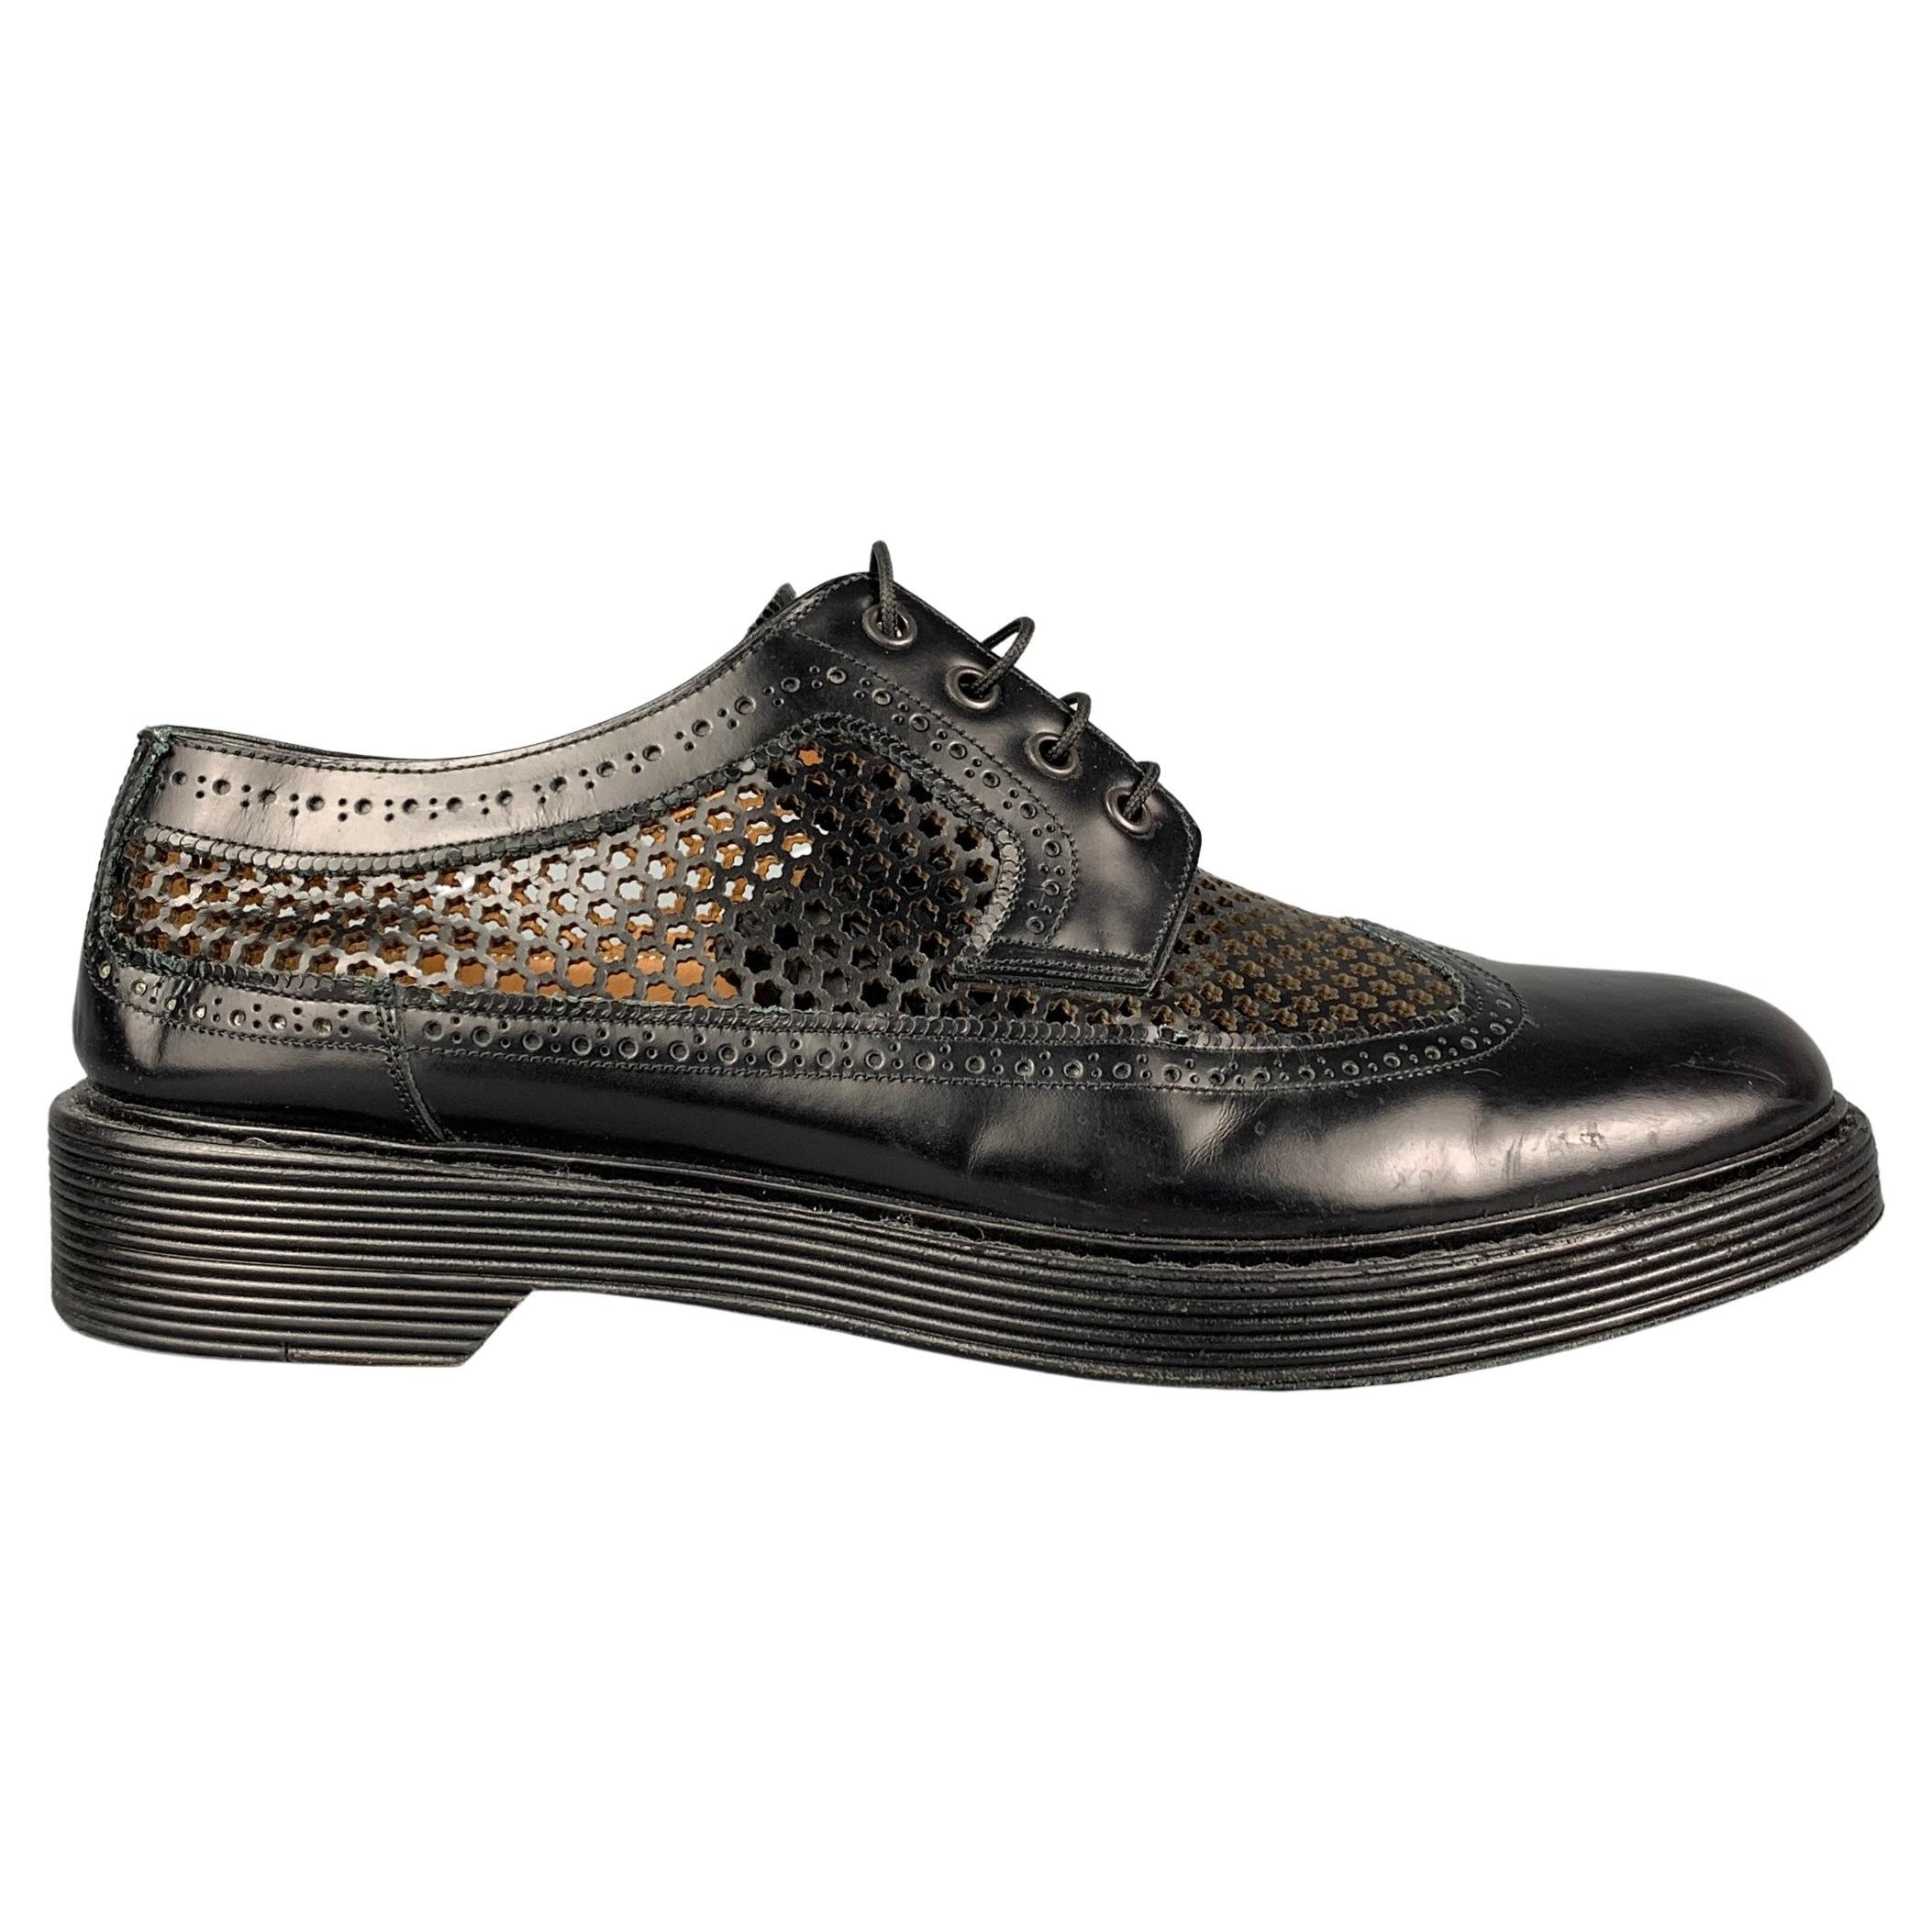 MARC JACOBS Size 10 Black Perforated Leather Wingtip Lace Up Shoes